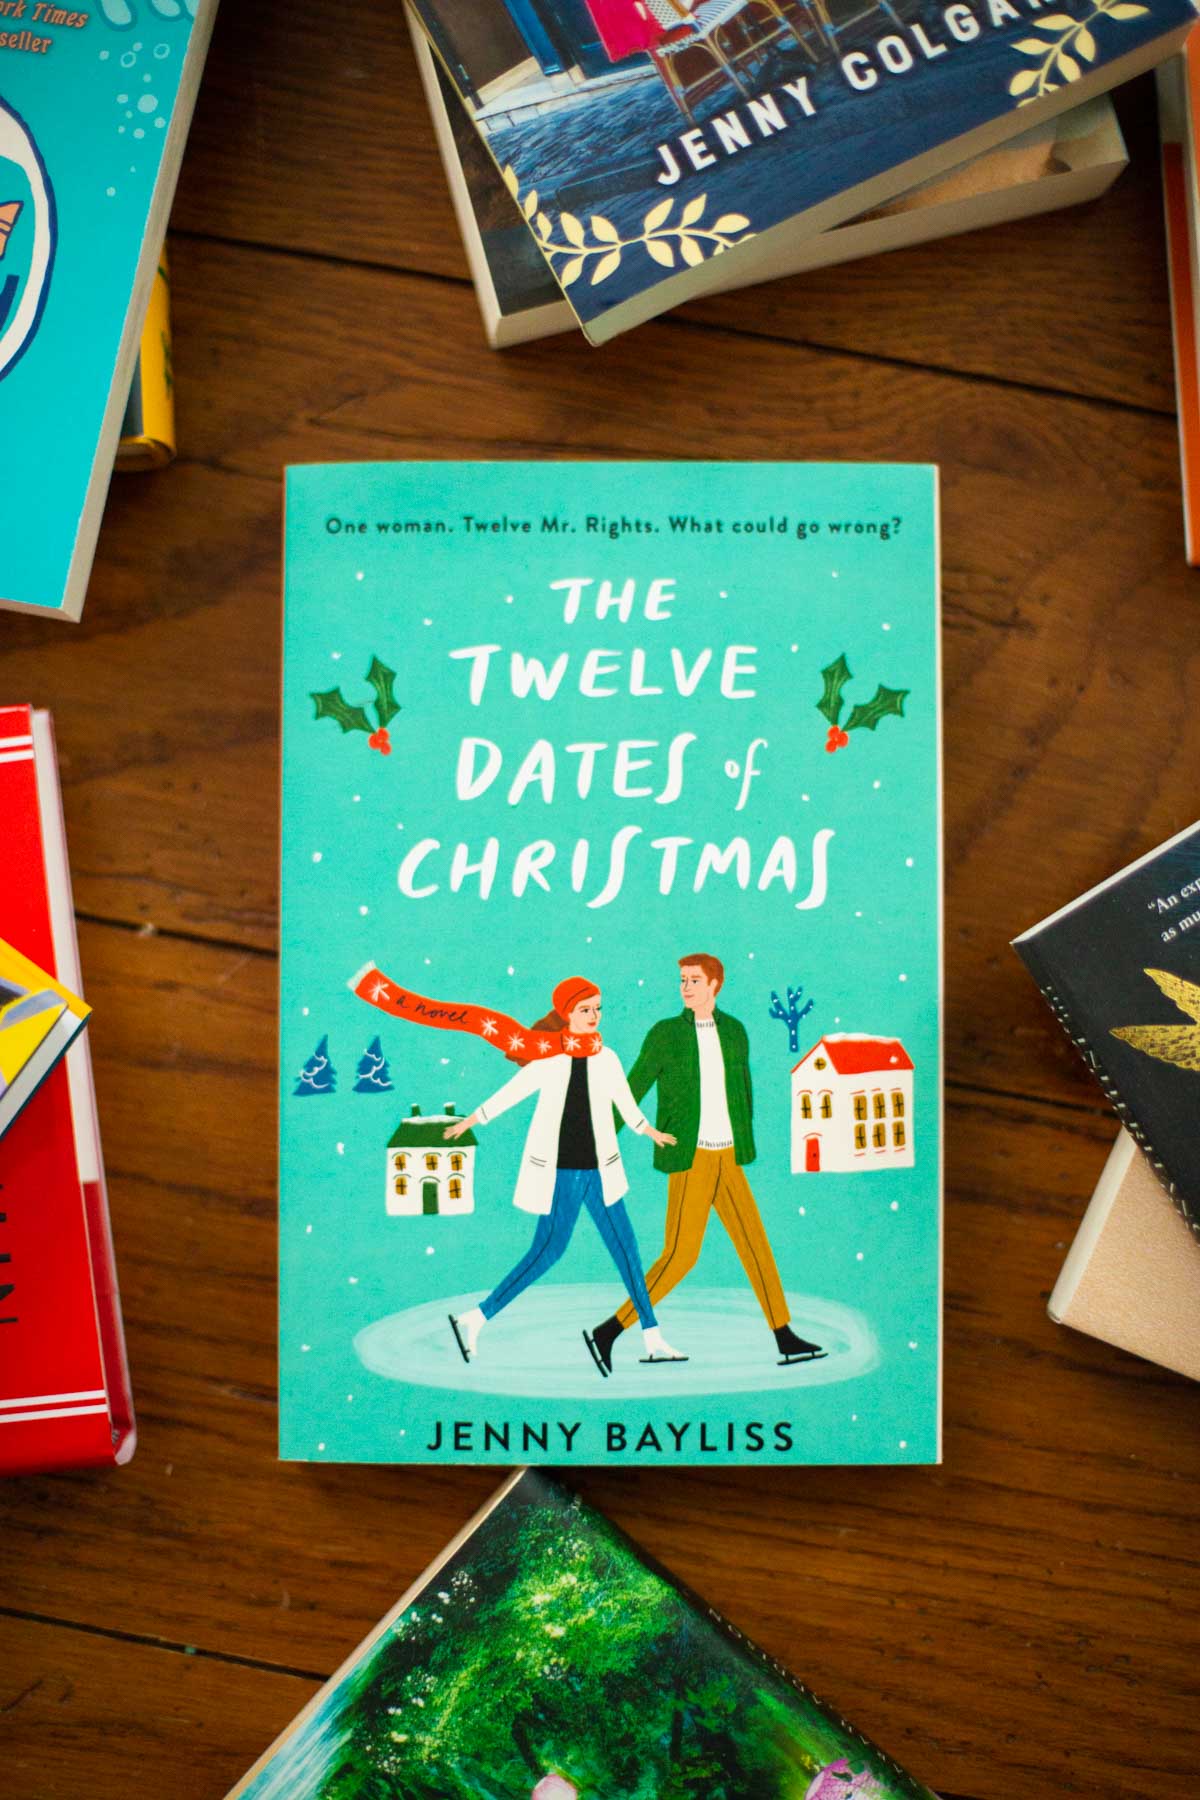 The copy of the book The Twelve Dates of Christmas is on the table.